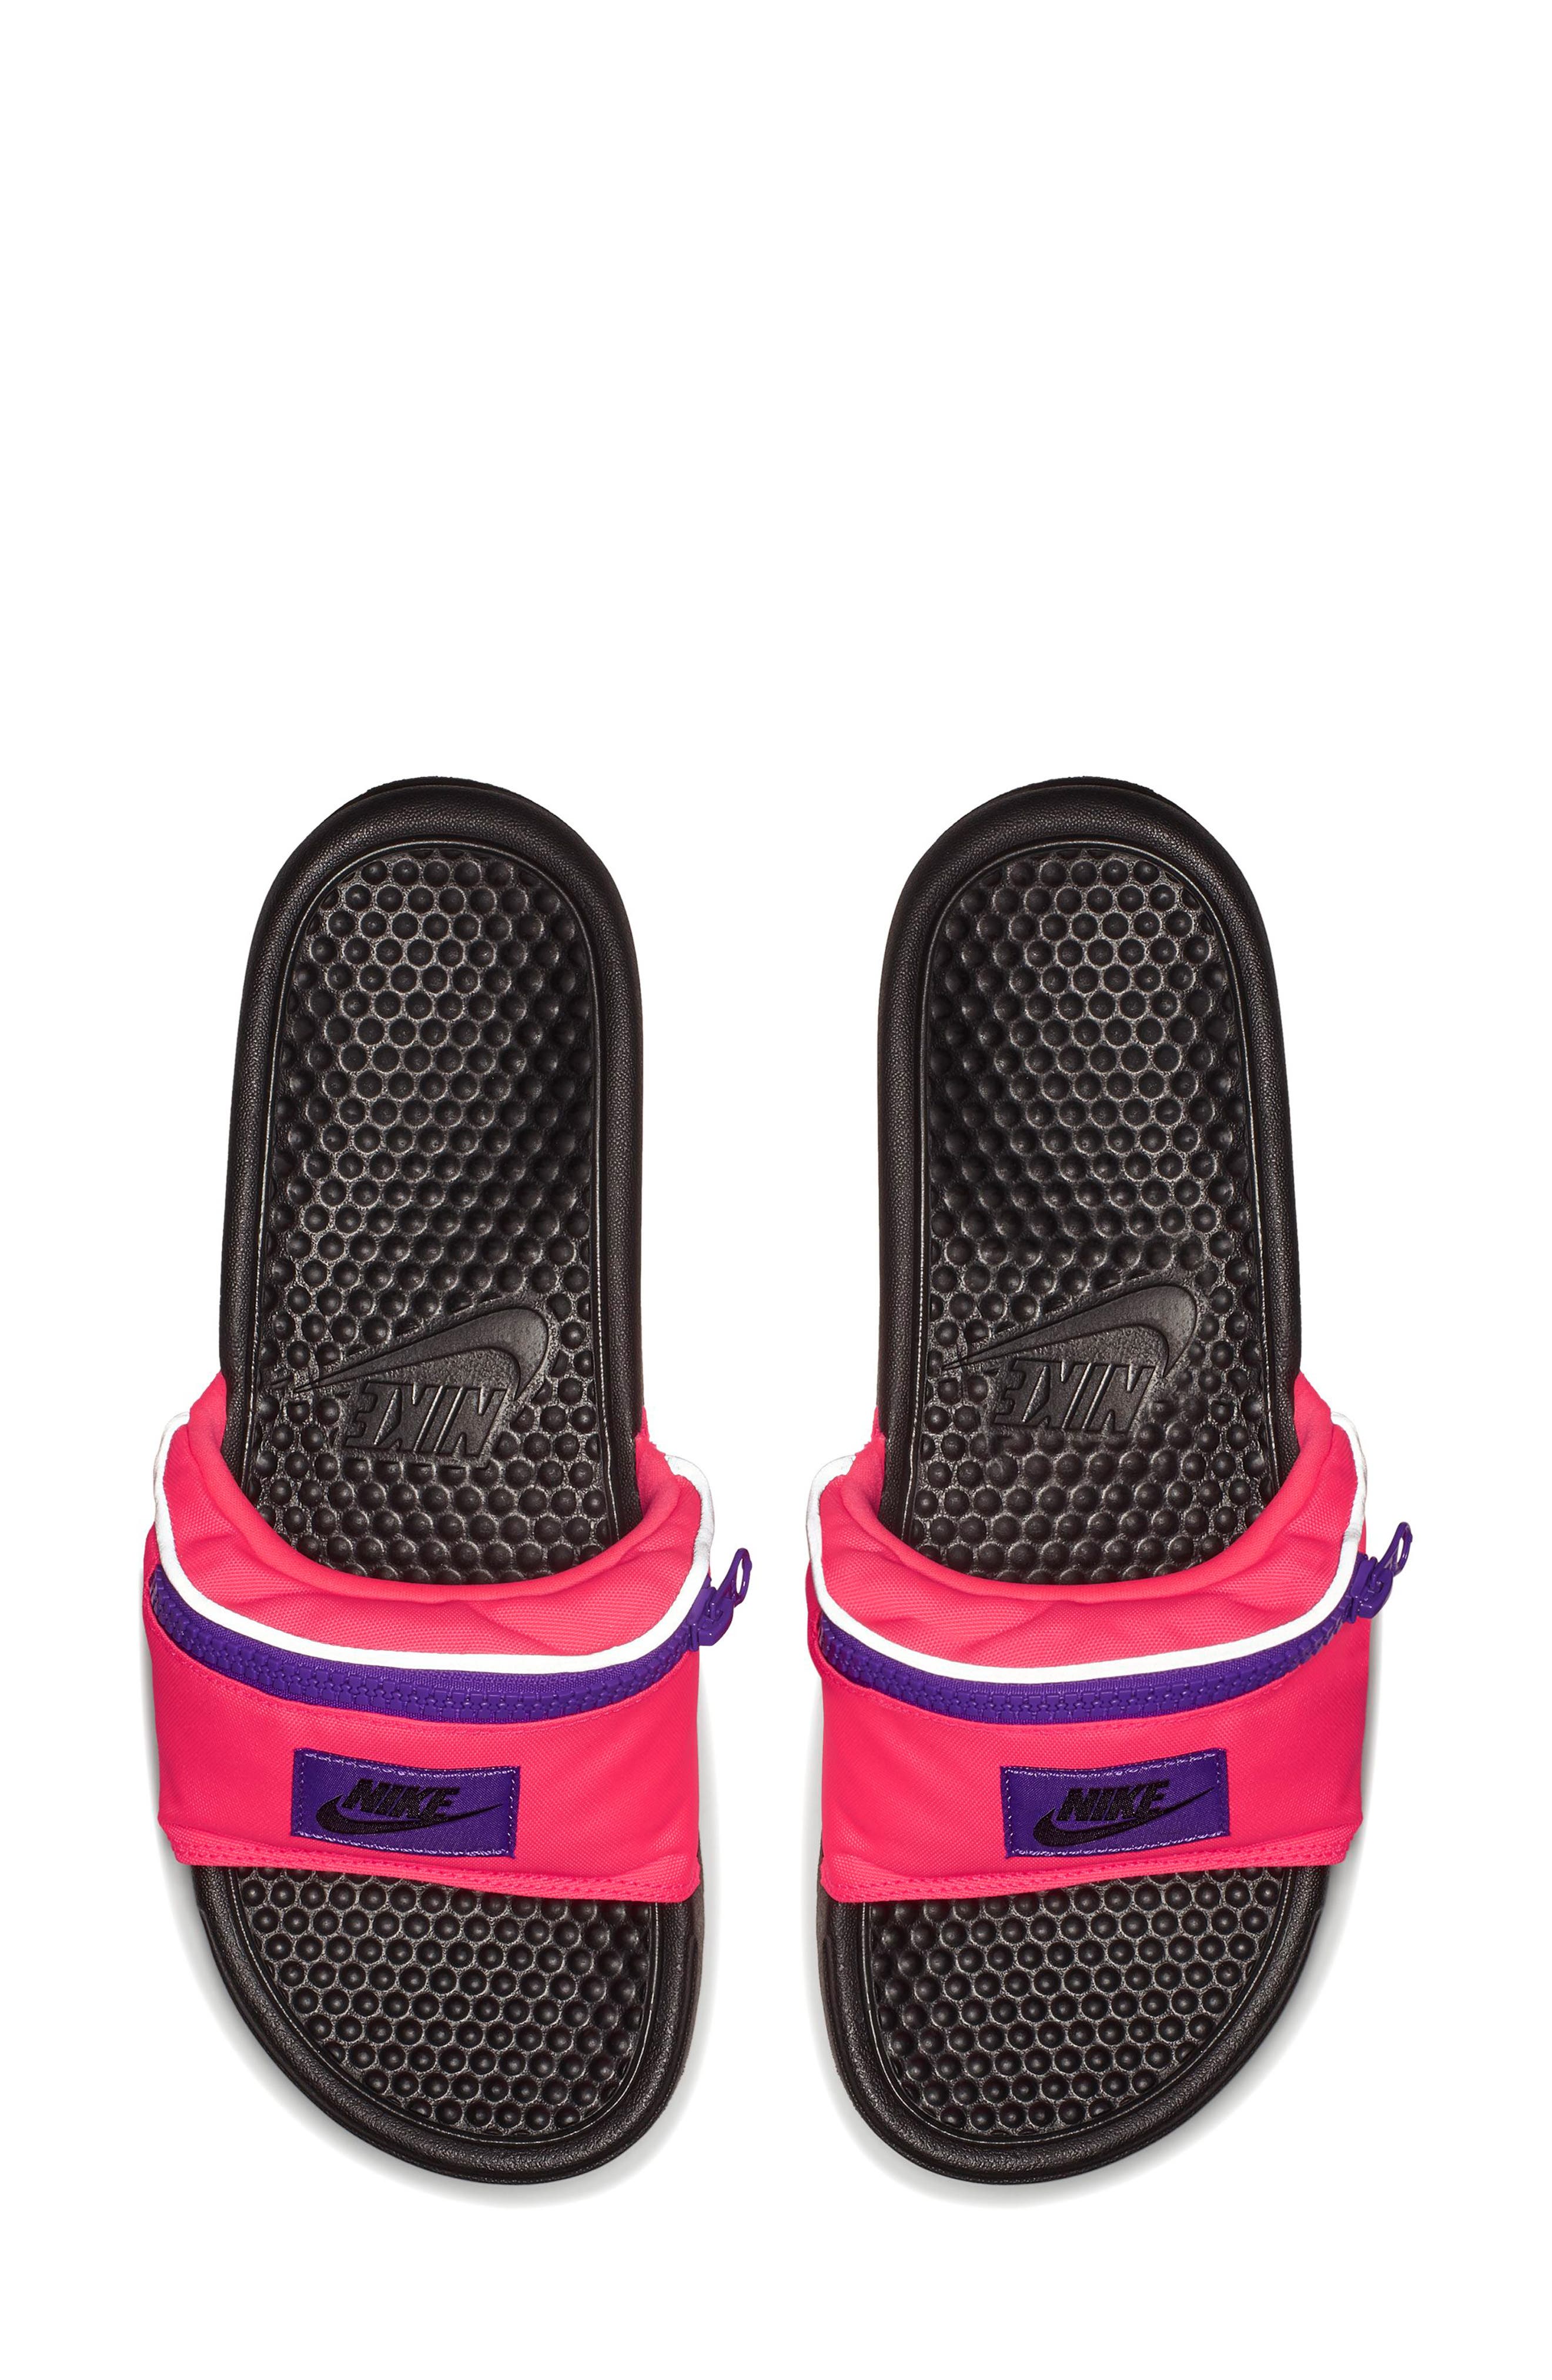 fanny pack sandals nike